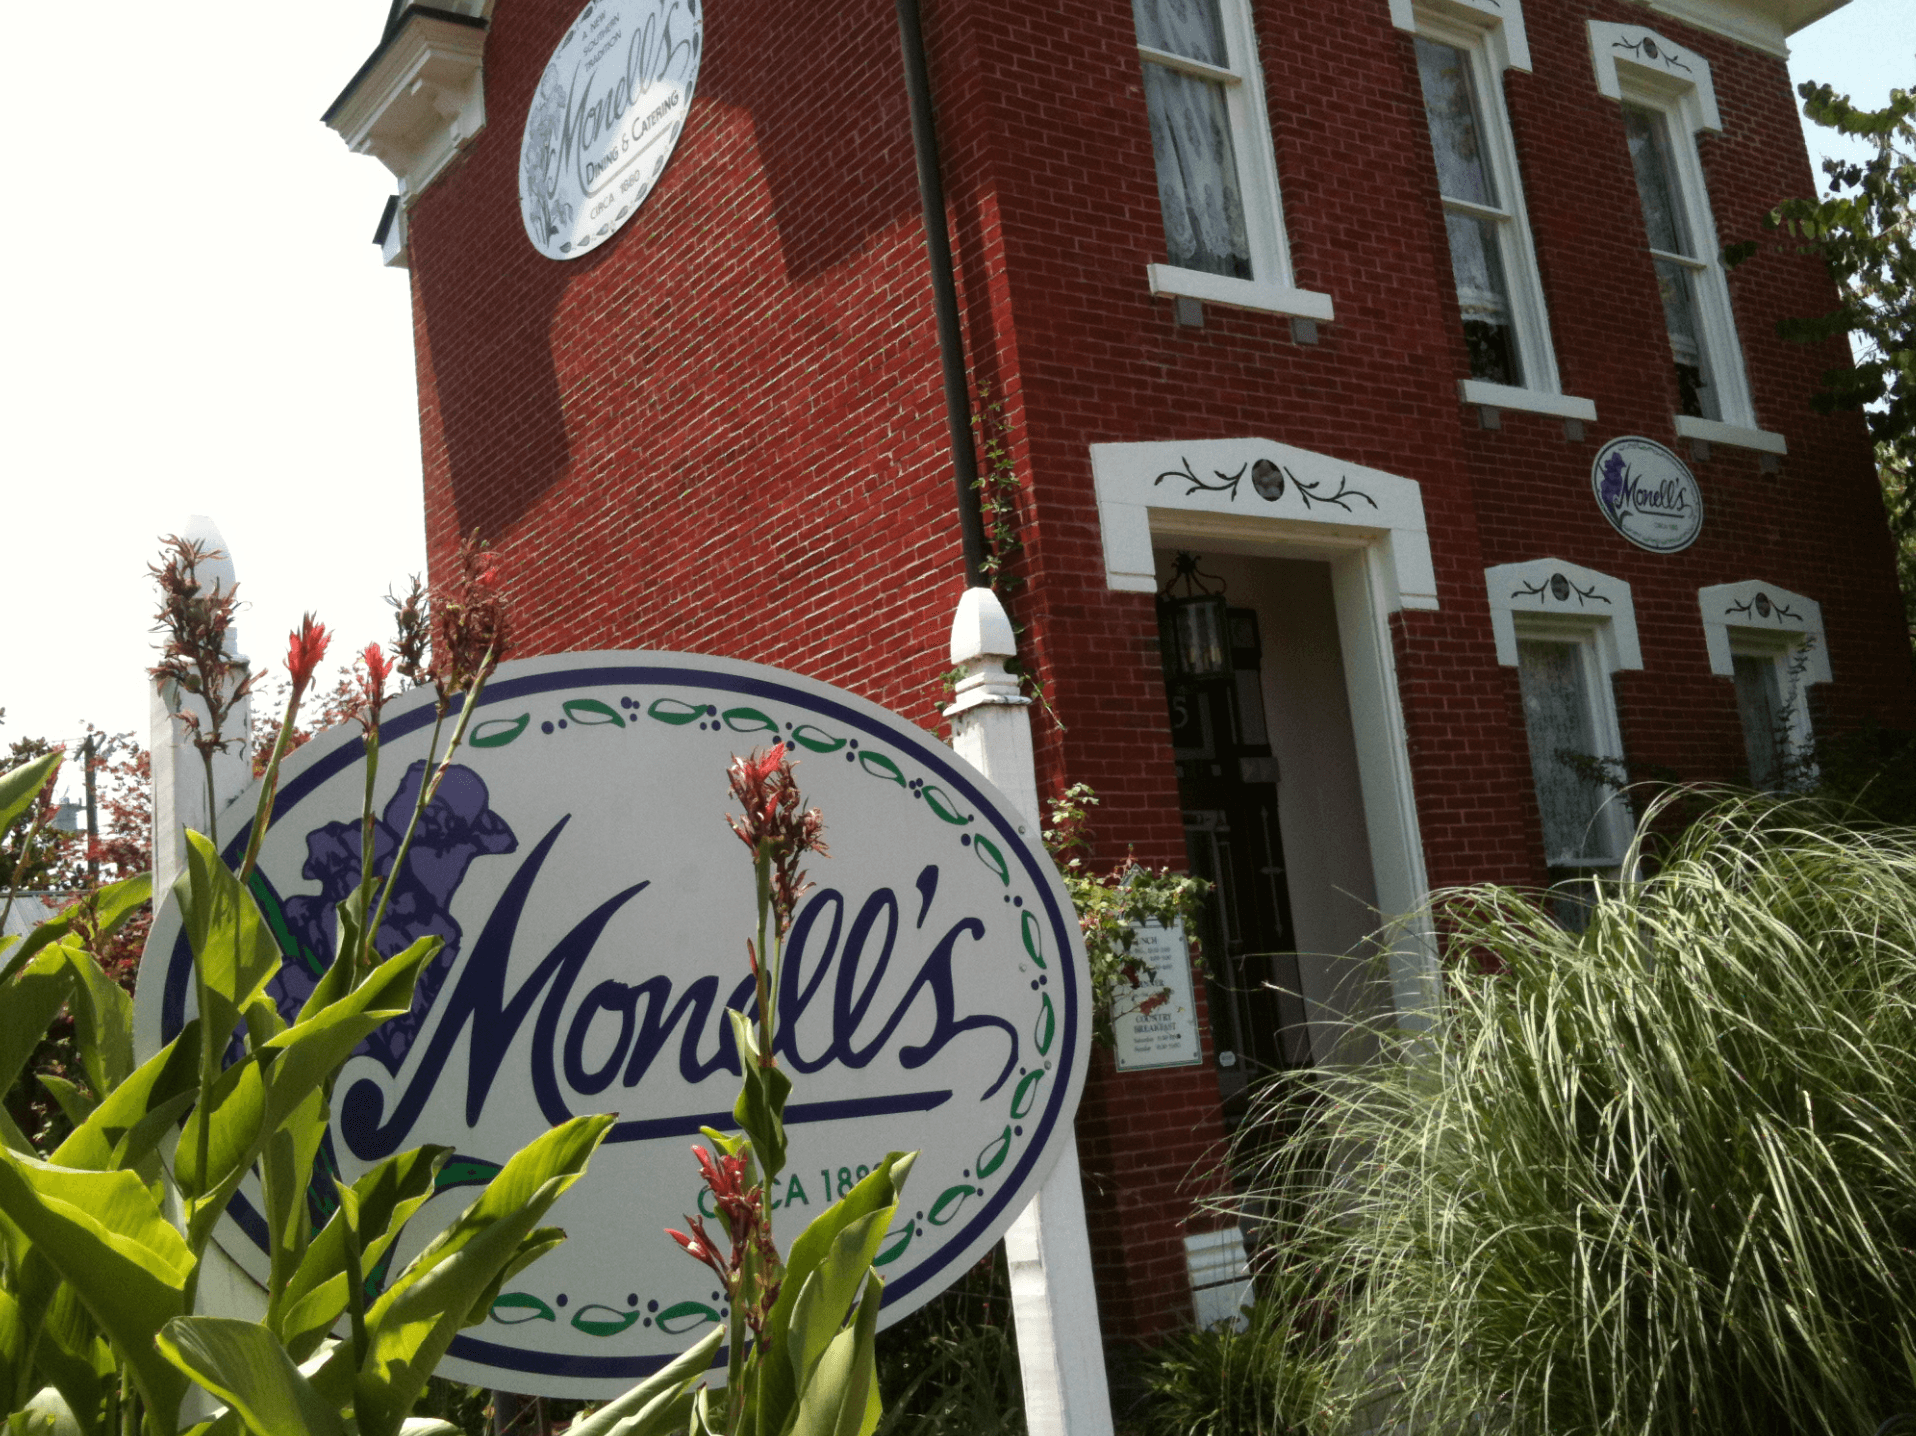 Cover image of this place Monell's Dining & Catering